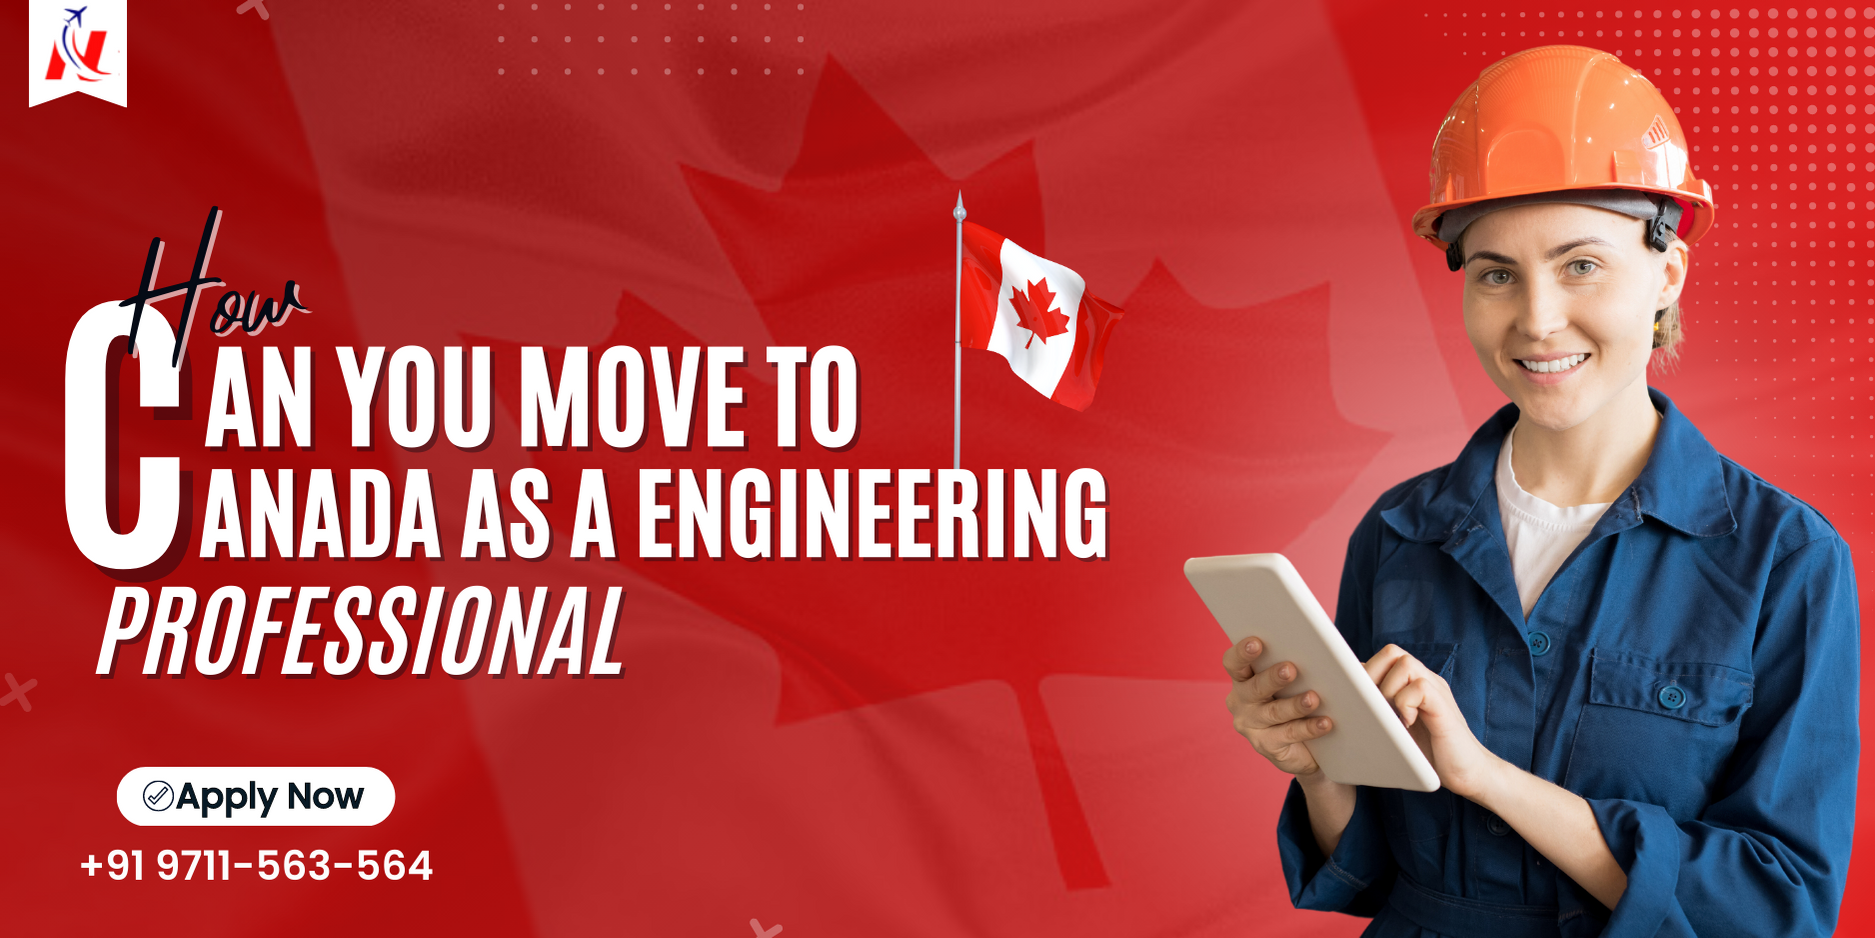 How can you move to Canada as an Engineering Professional?